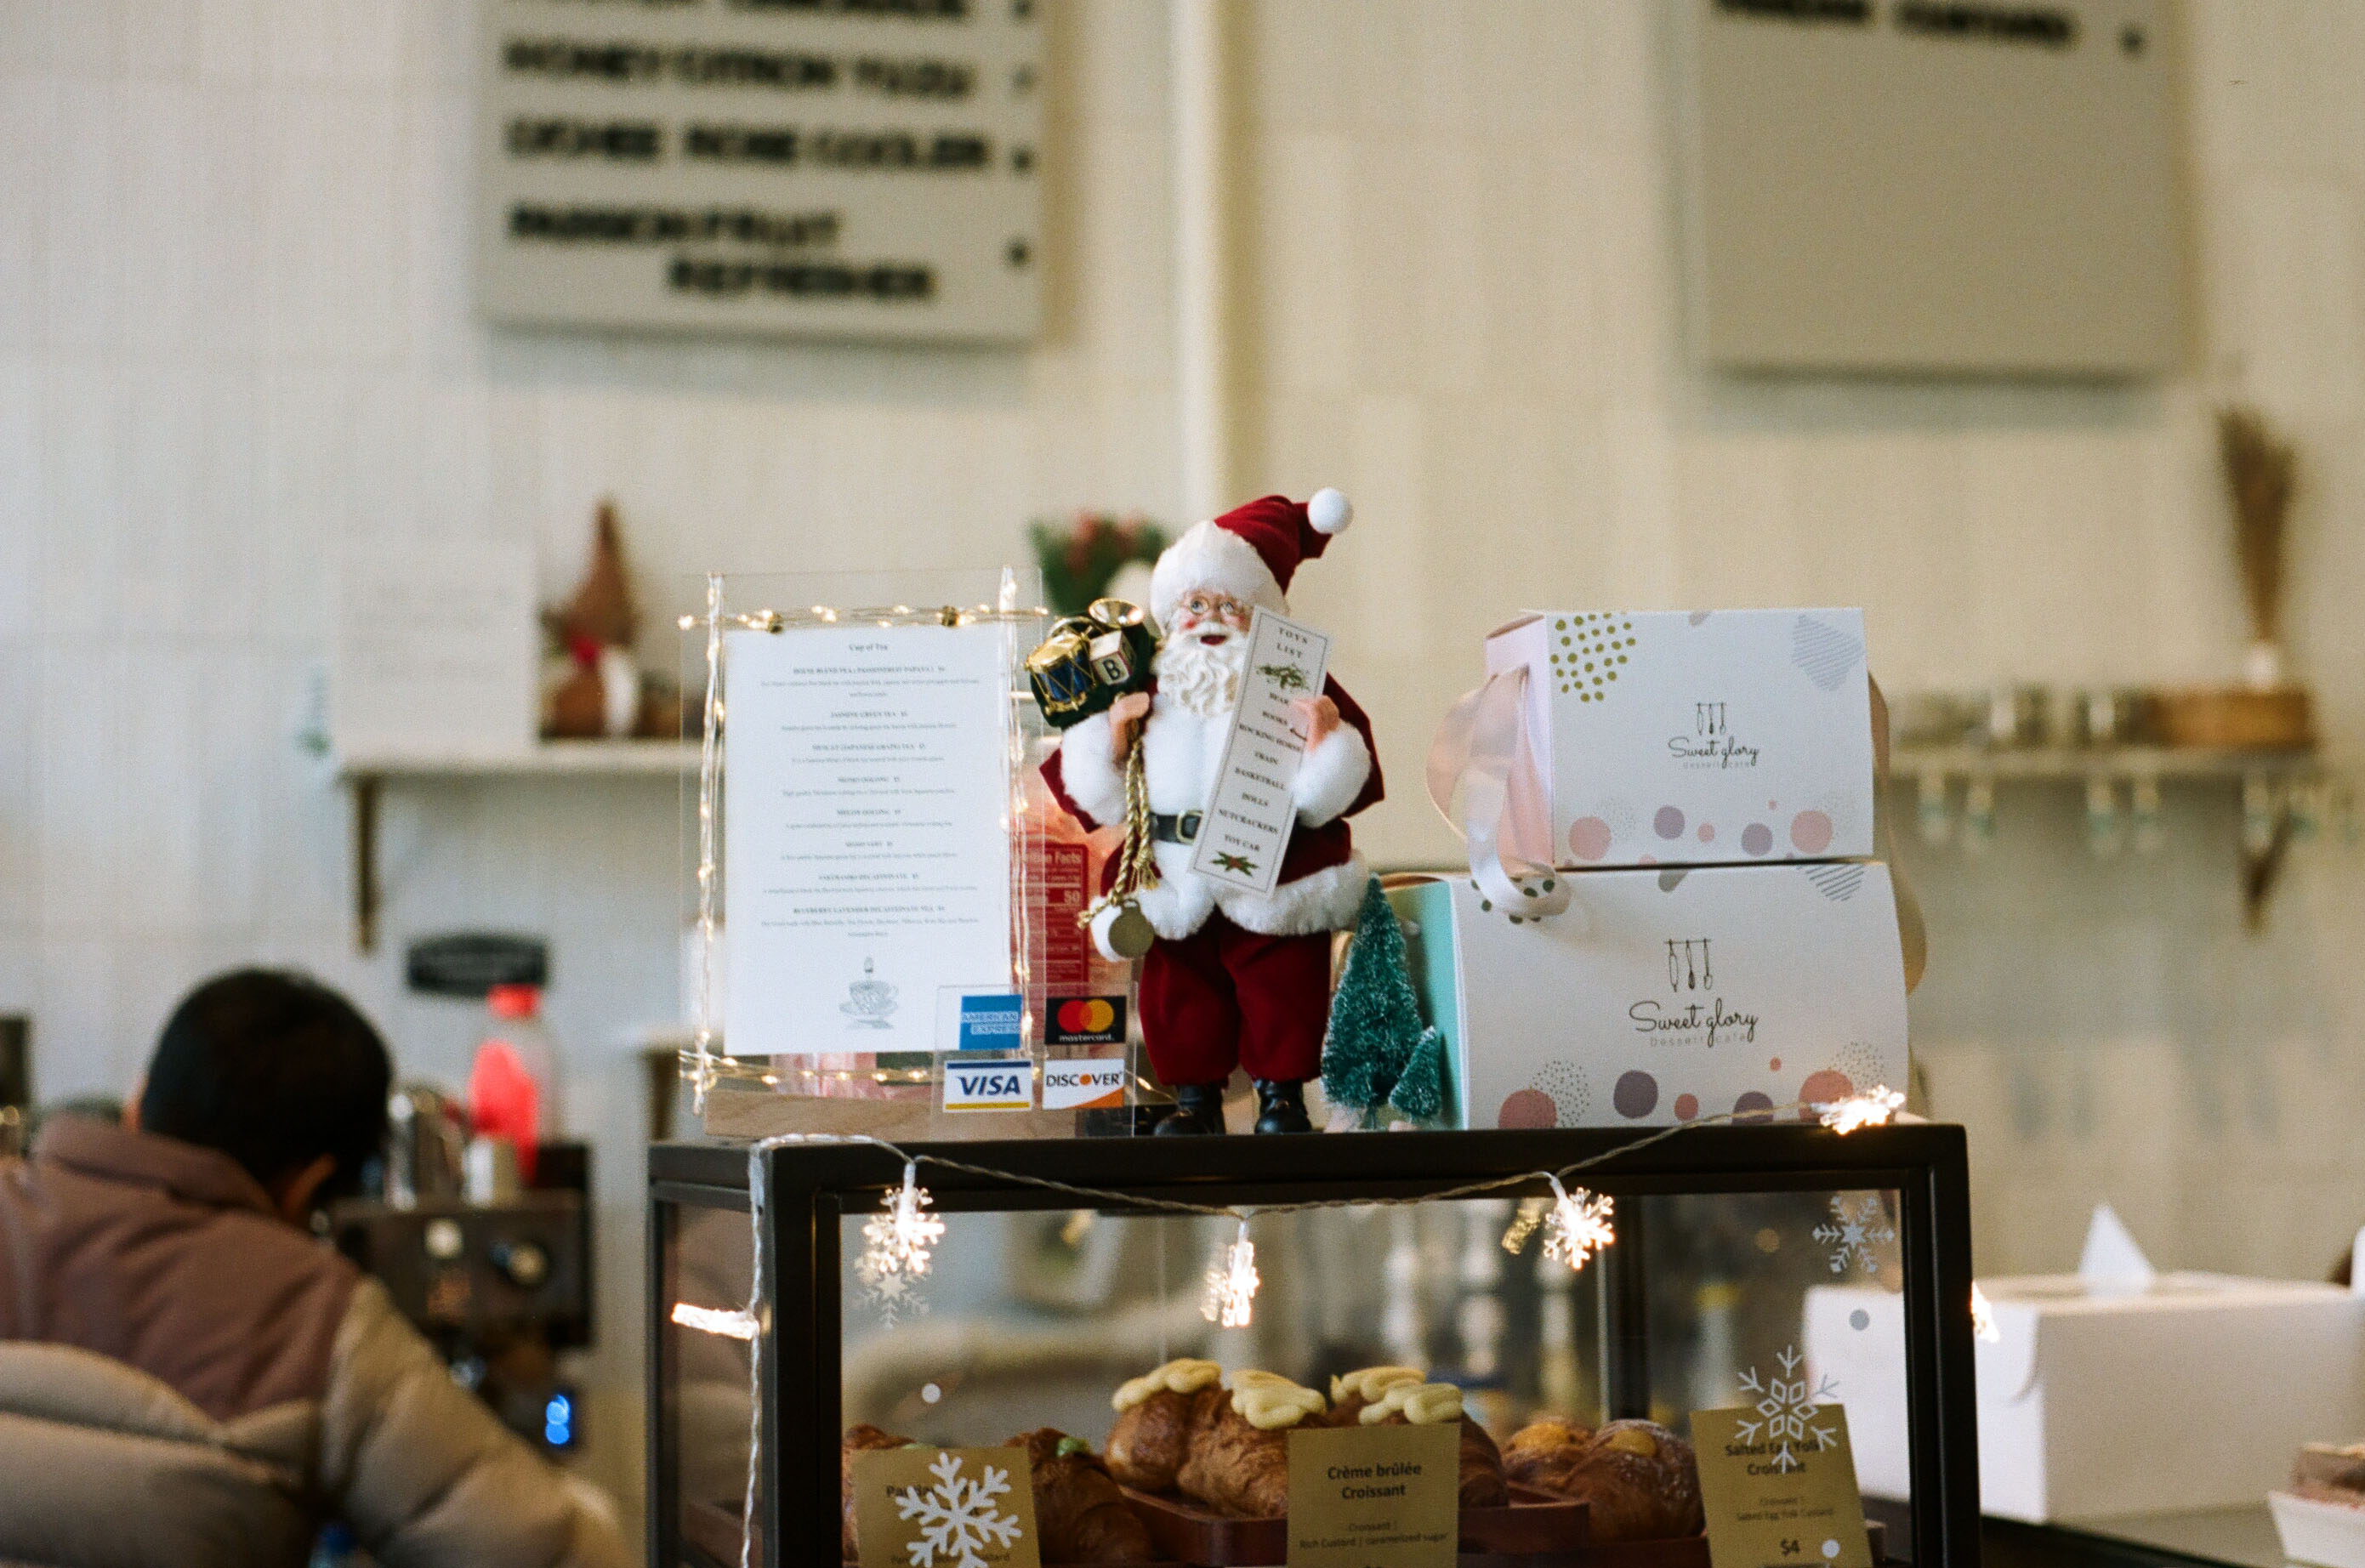 A Santa figurine on a glass display full of cakes